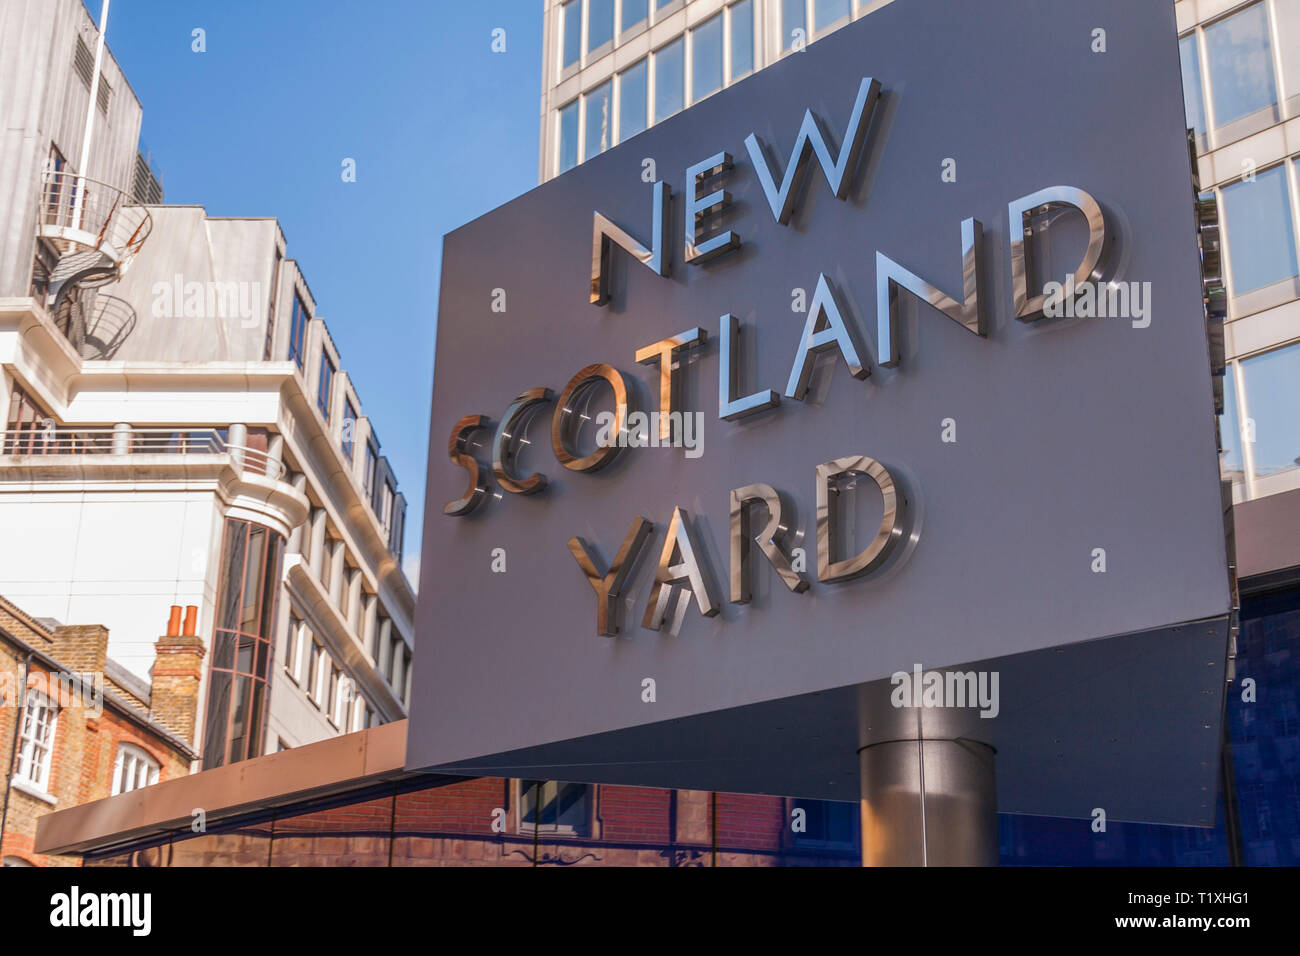 Former Whitehall police station to be new Scotland Yard HQ, The  Independent